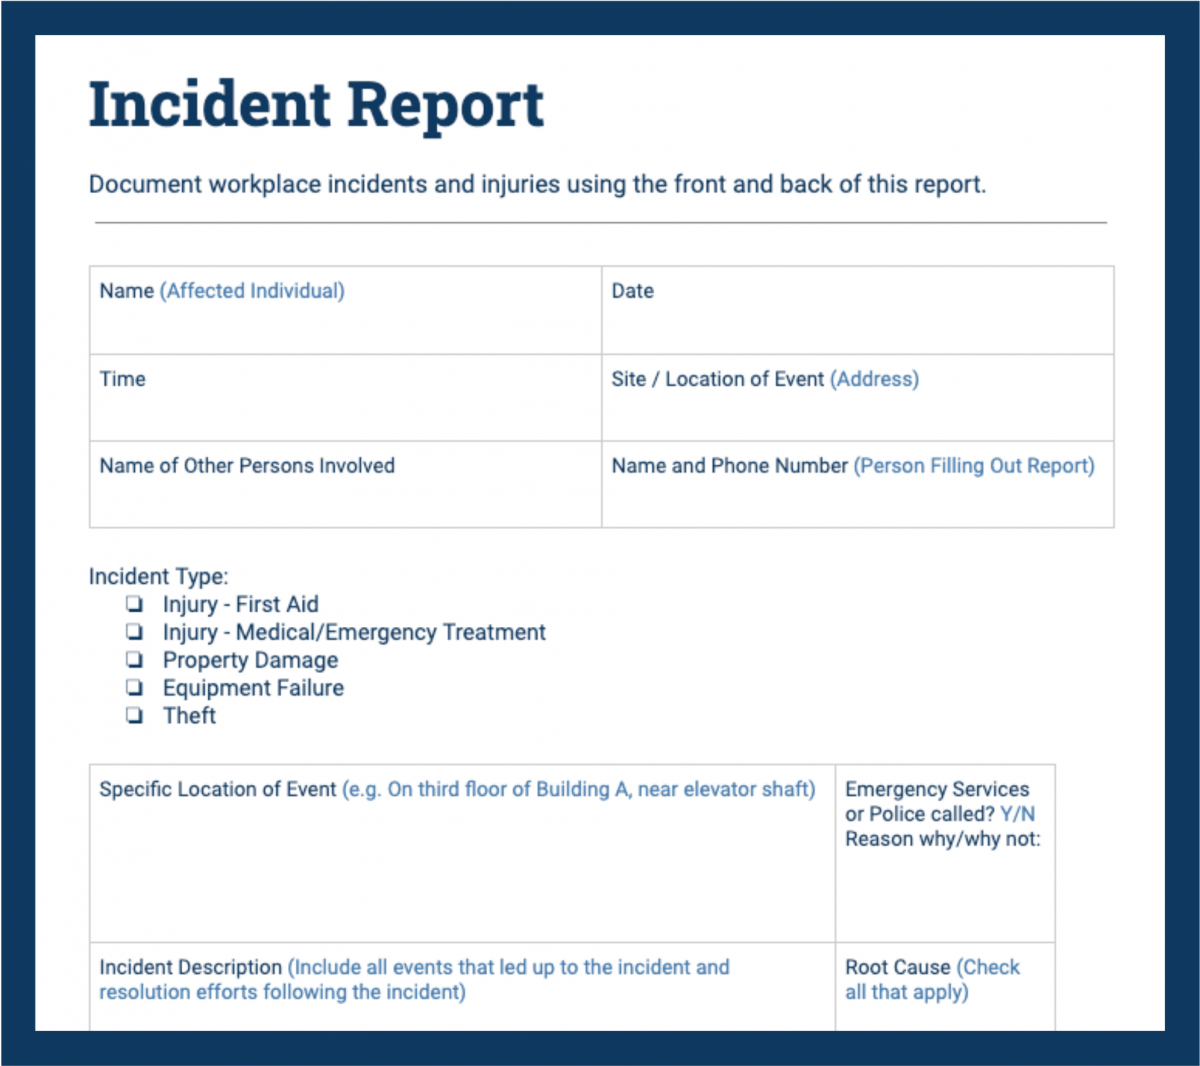 Incident Report Samples to Help You Describe Accidents - Safesite Throughout Workplace Investigation Report Template